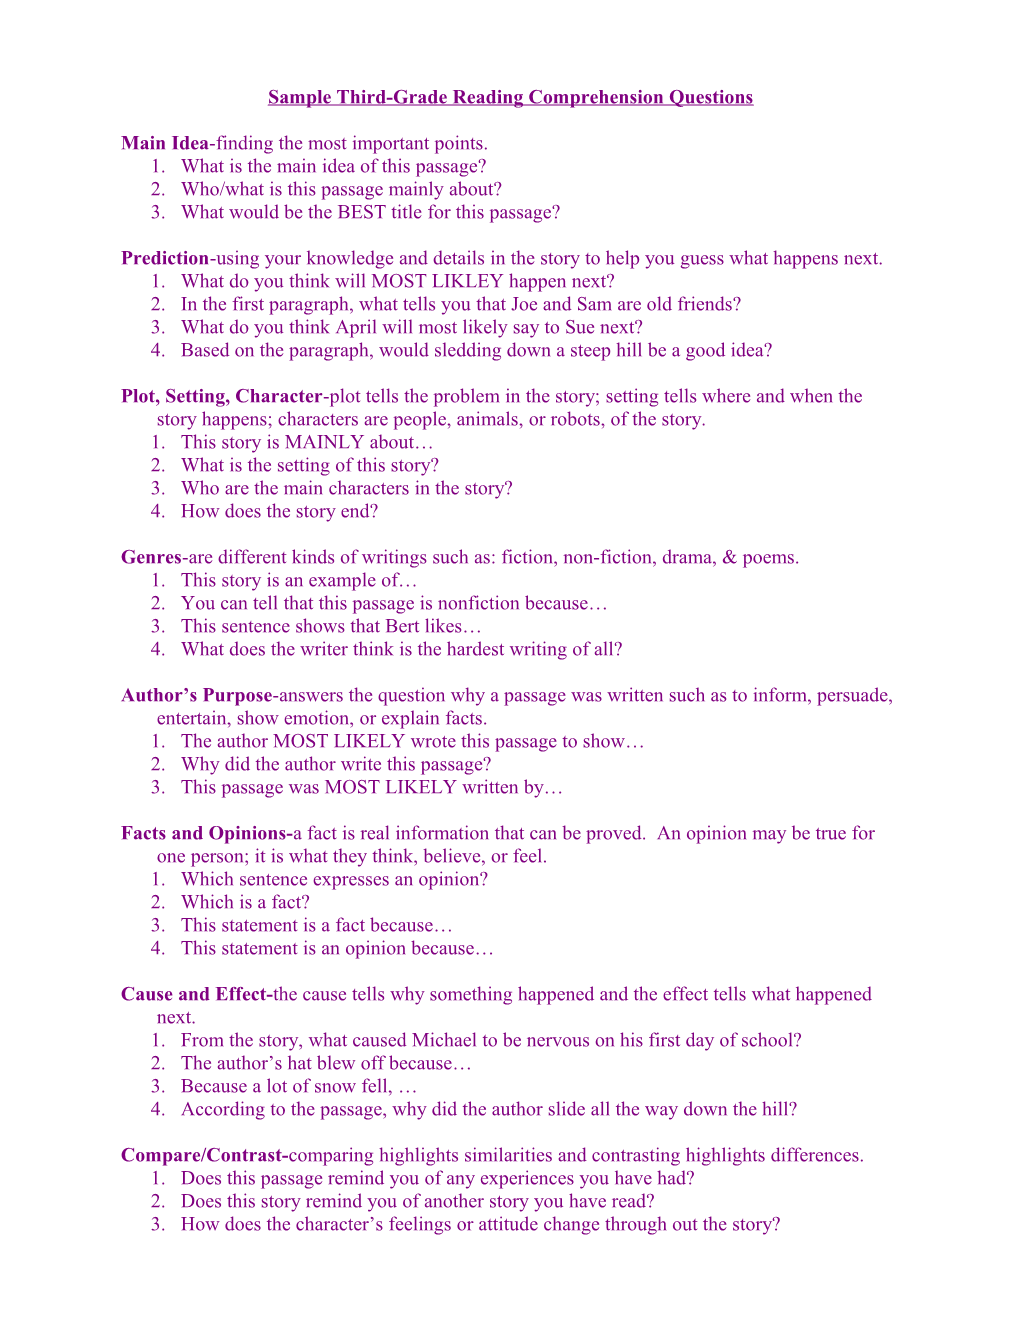 Sample Reading Comprehension Questions